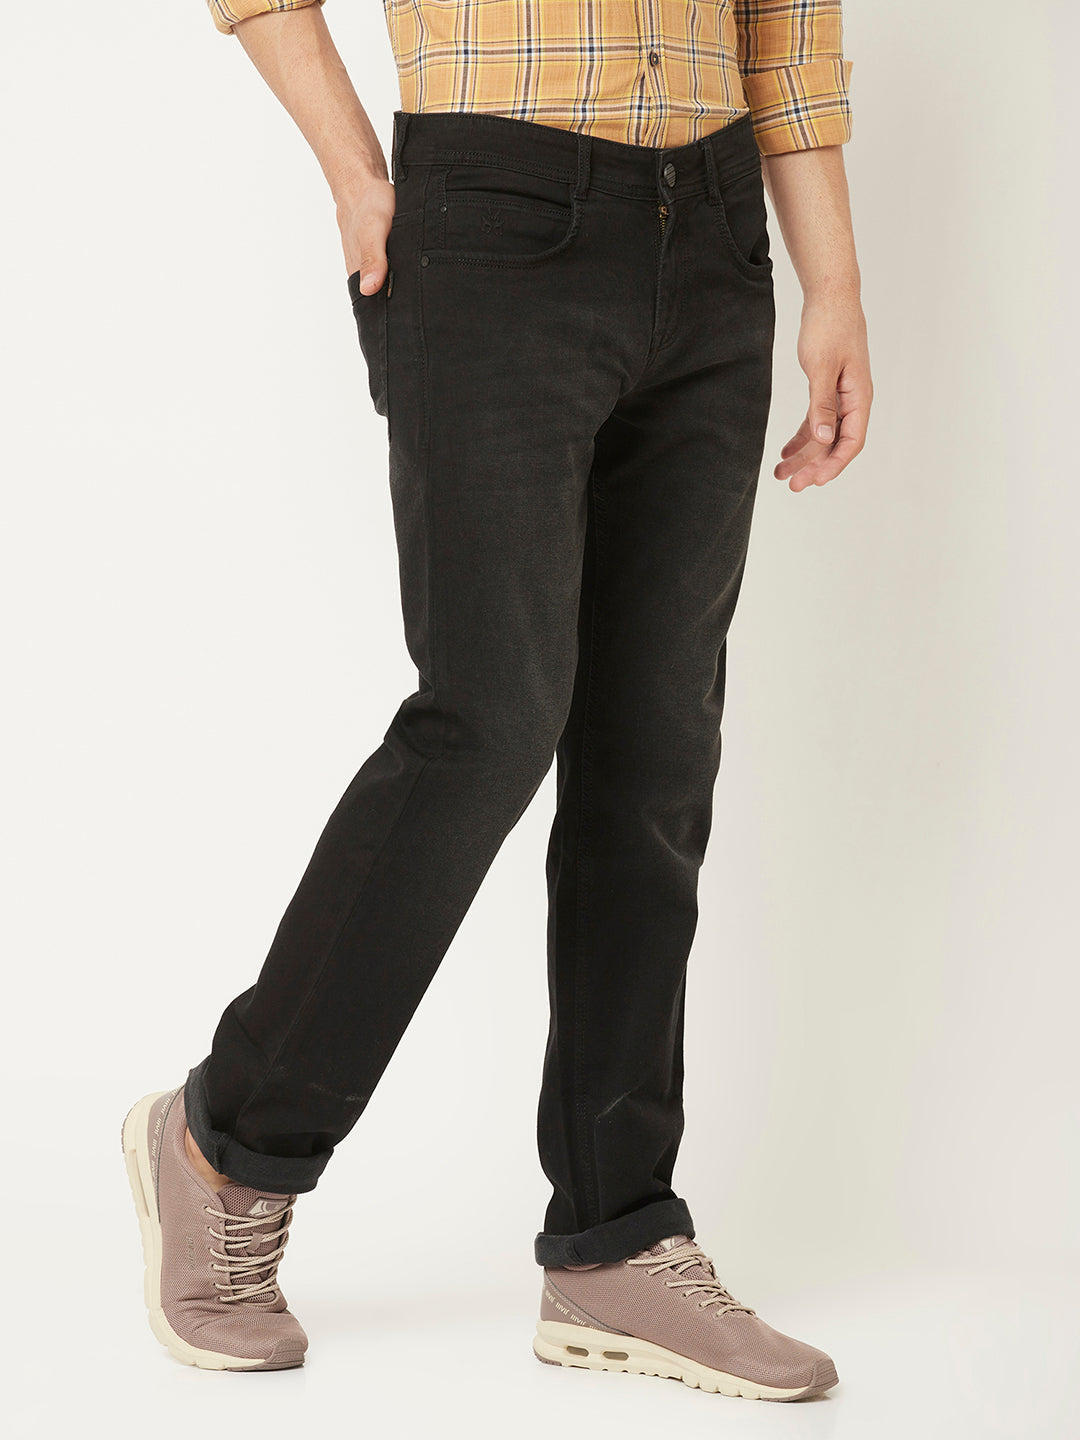  Charcoal Grey Jeans in Straight Fit 